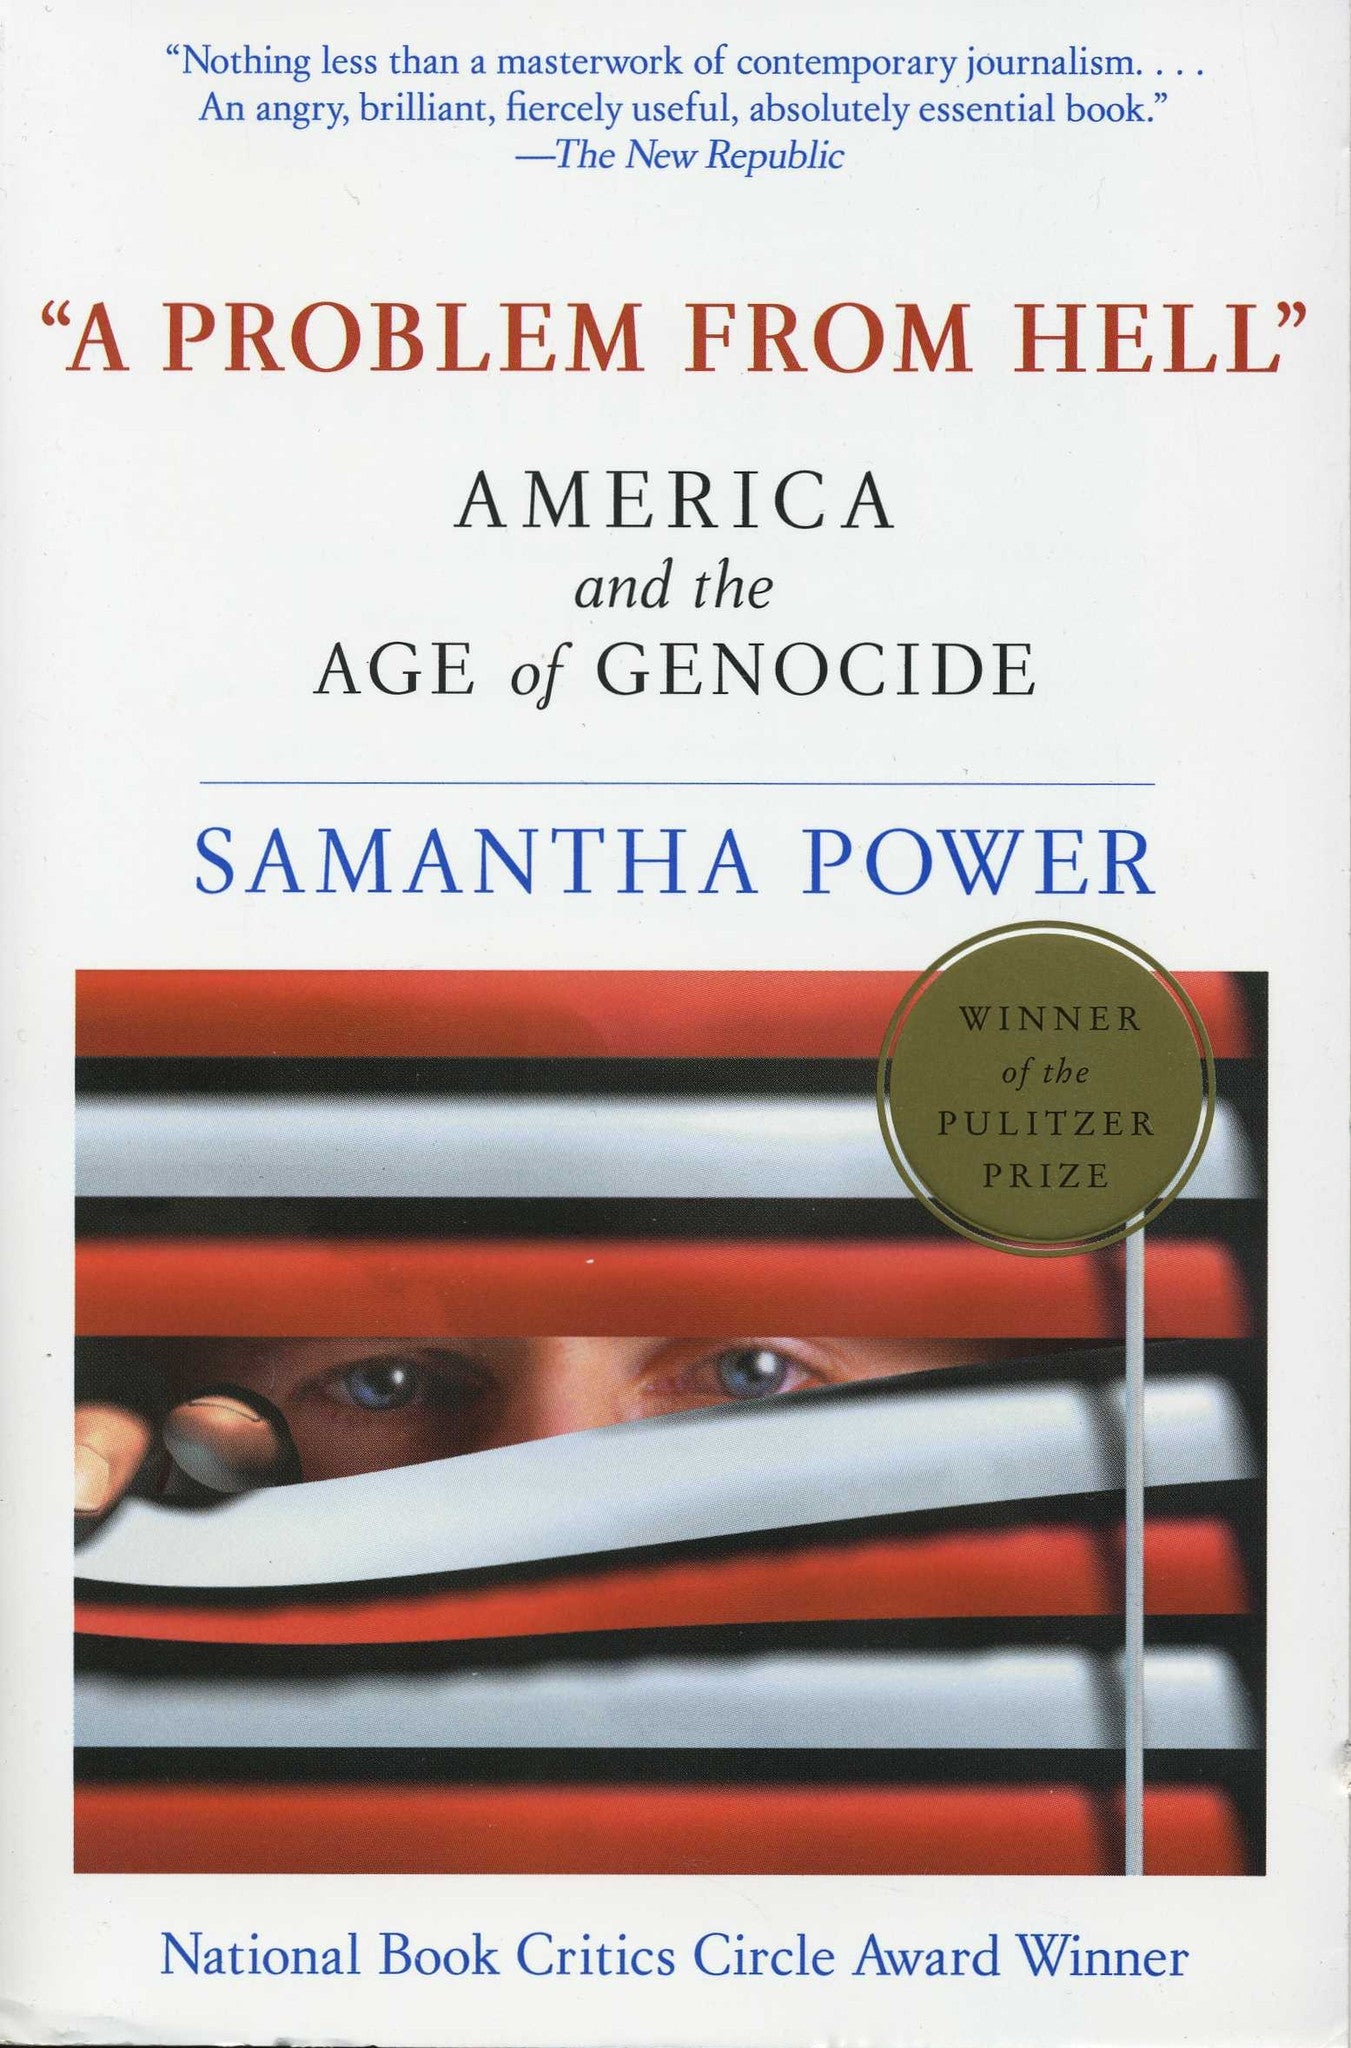 "A PROBLEM FROM HELL": AMERICA AND THE AGE OF GENOCIDE